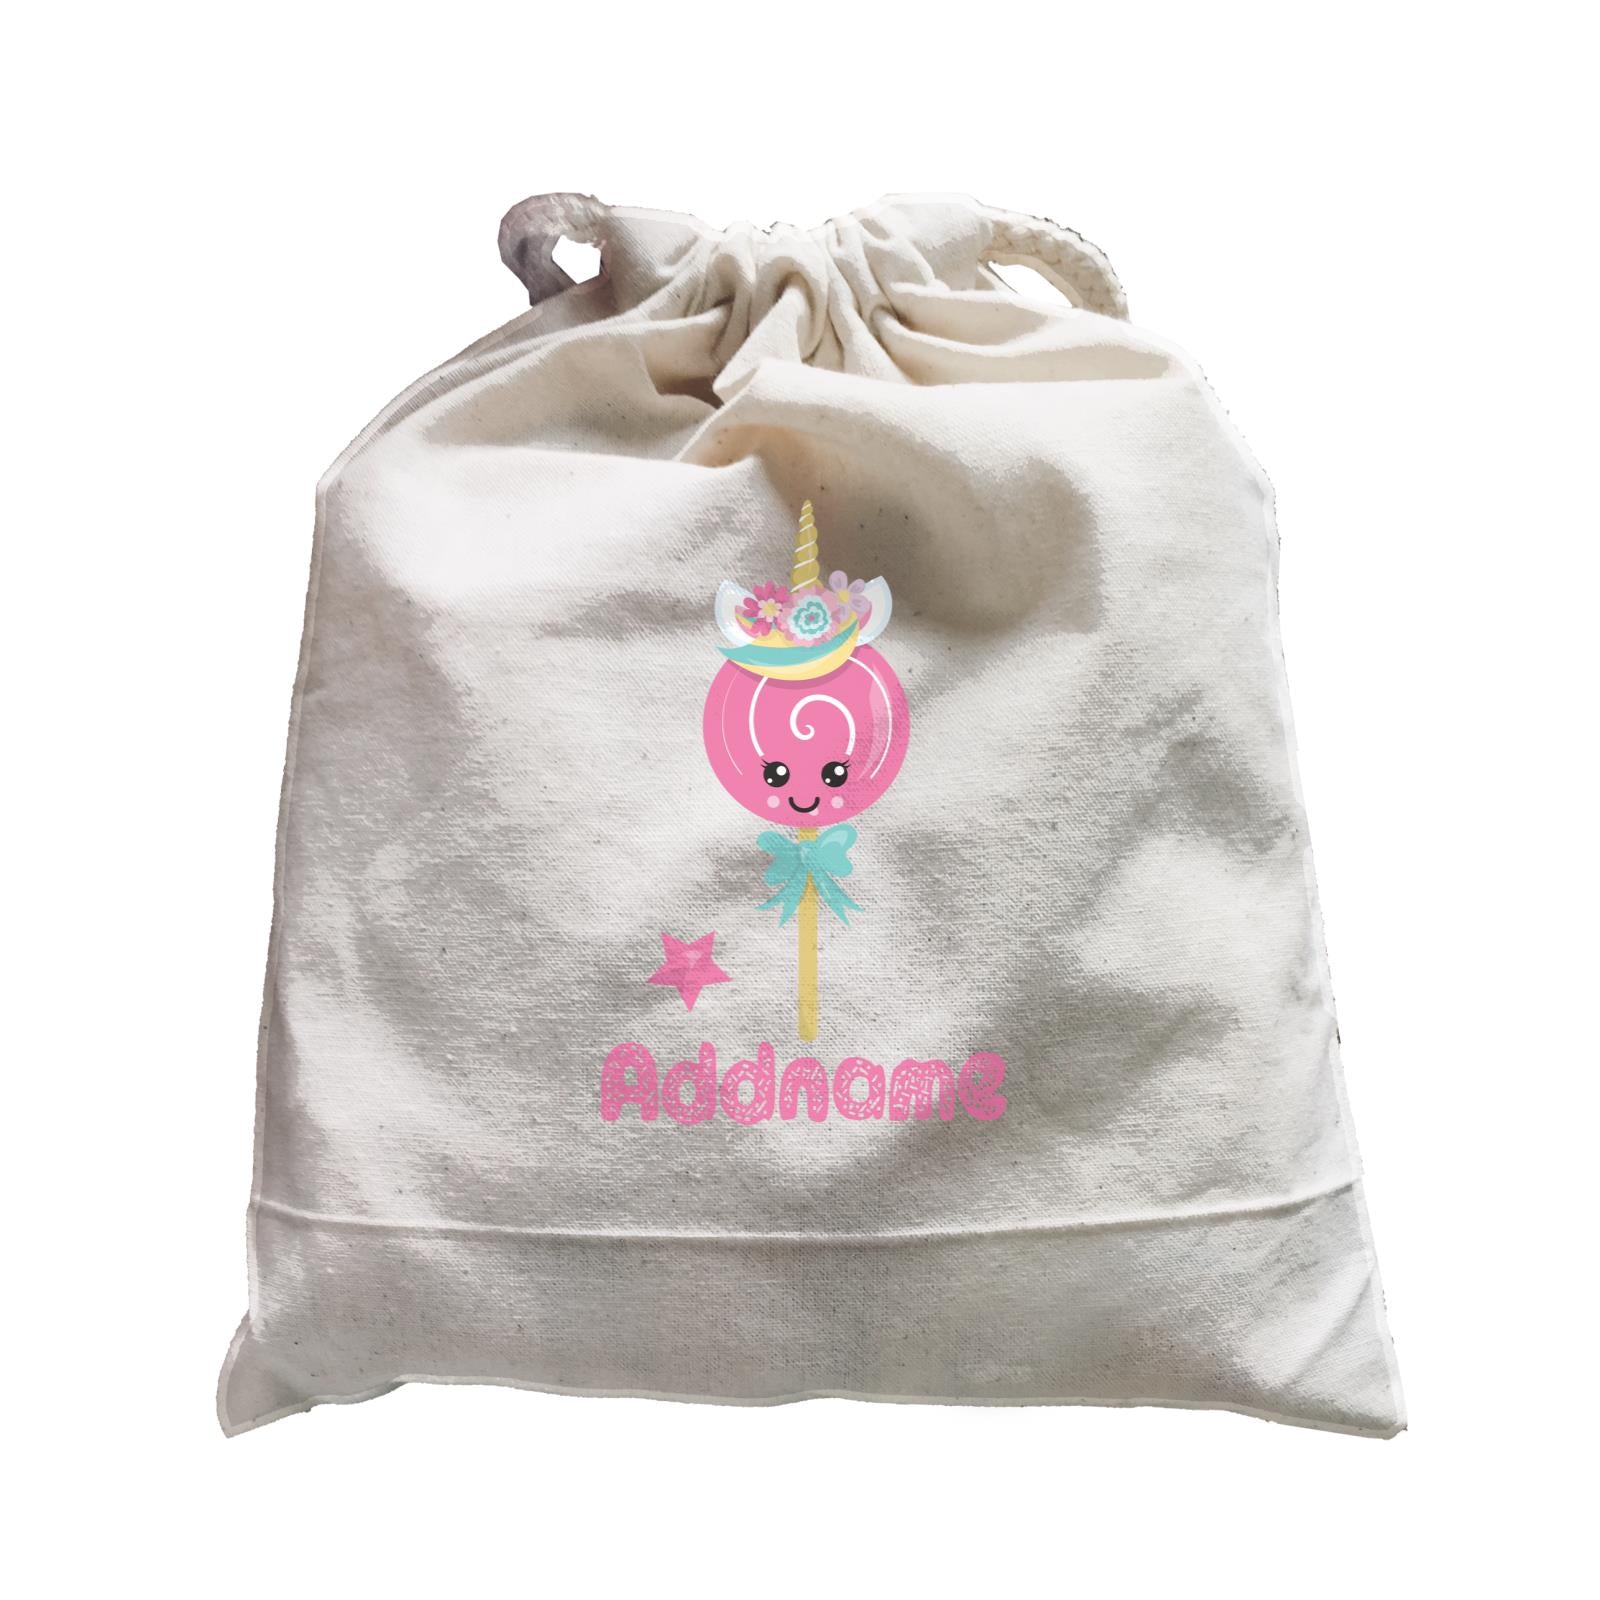 Magical Sweets Pink Lollipop Addname Satchel